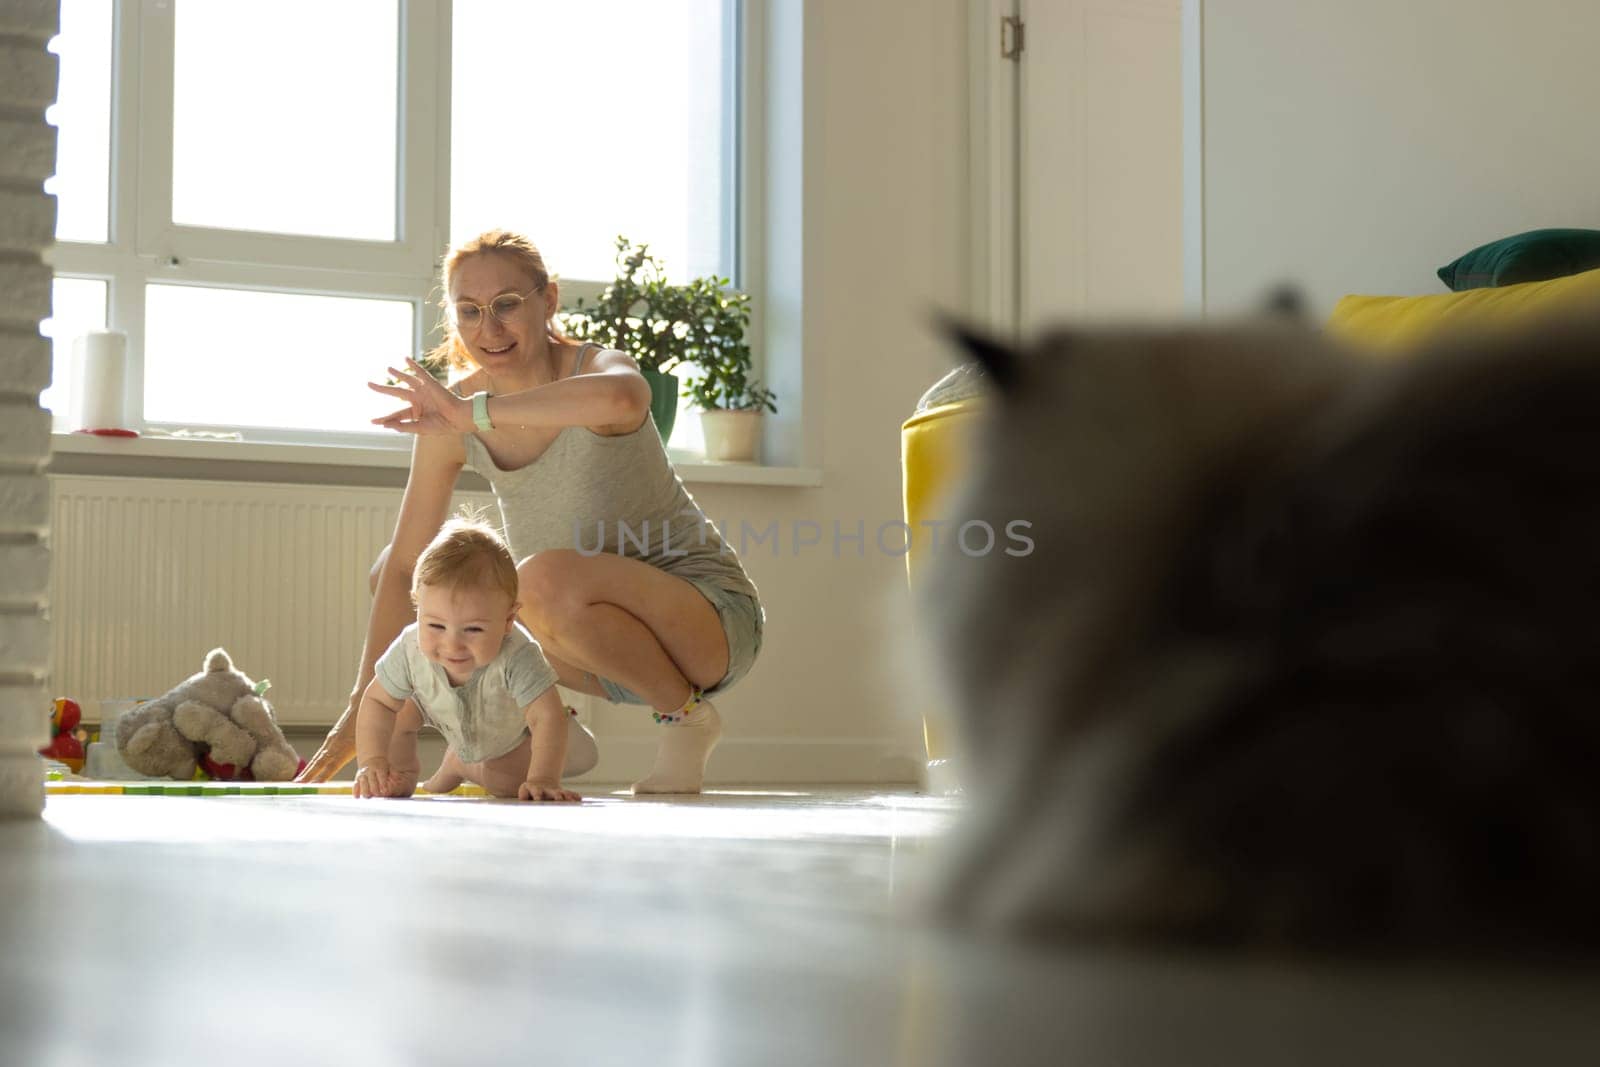 A woman kneeling down next to a baby and a cat